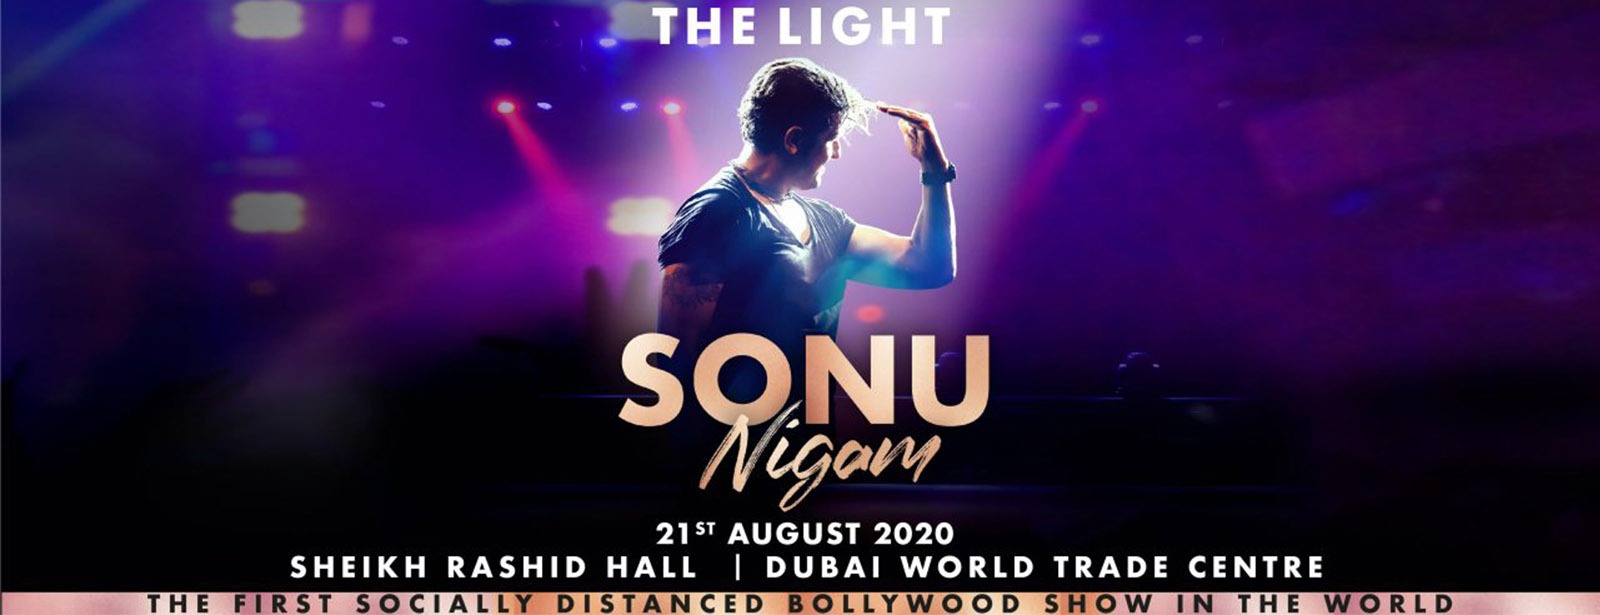 “The Light” Live Concert by Sonu Nigam - Coming Soon in UAE